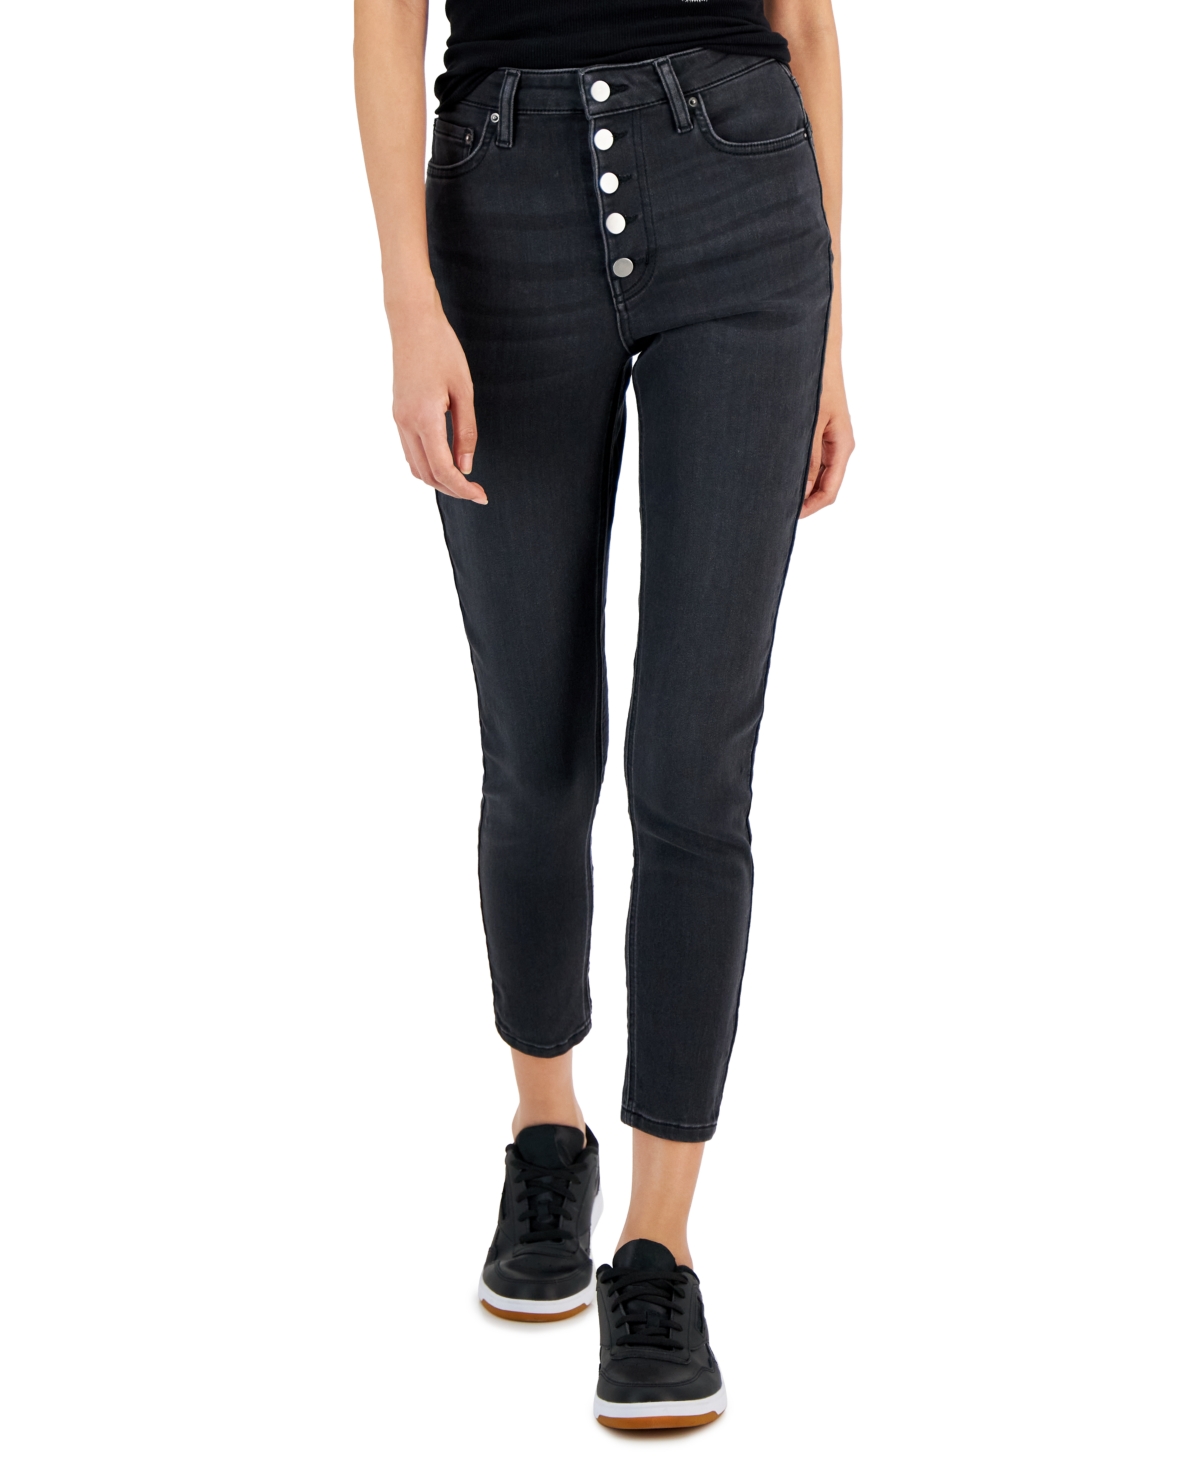 Tinseltown Juniors' Button-fly Mid-rise Skinny Ankle Jeans In Black